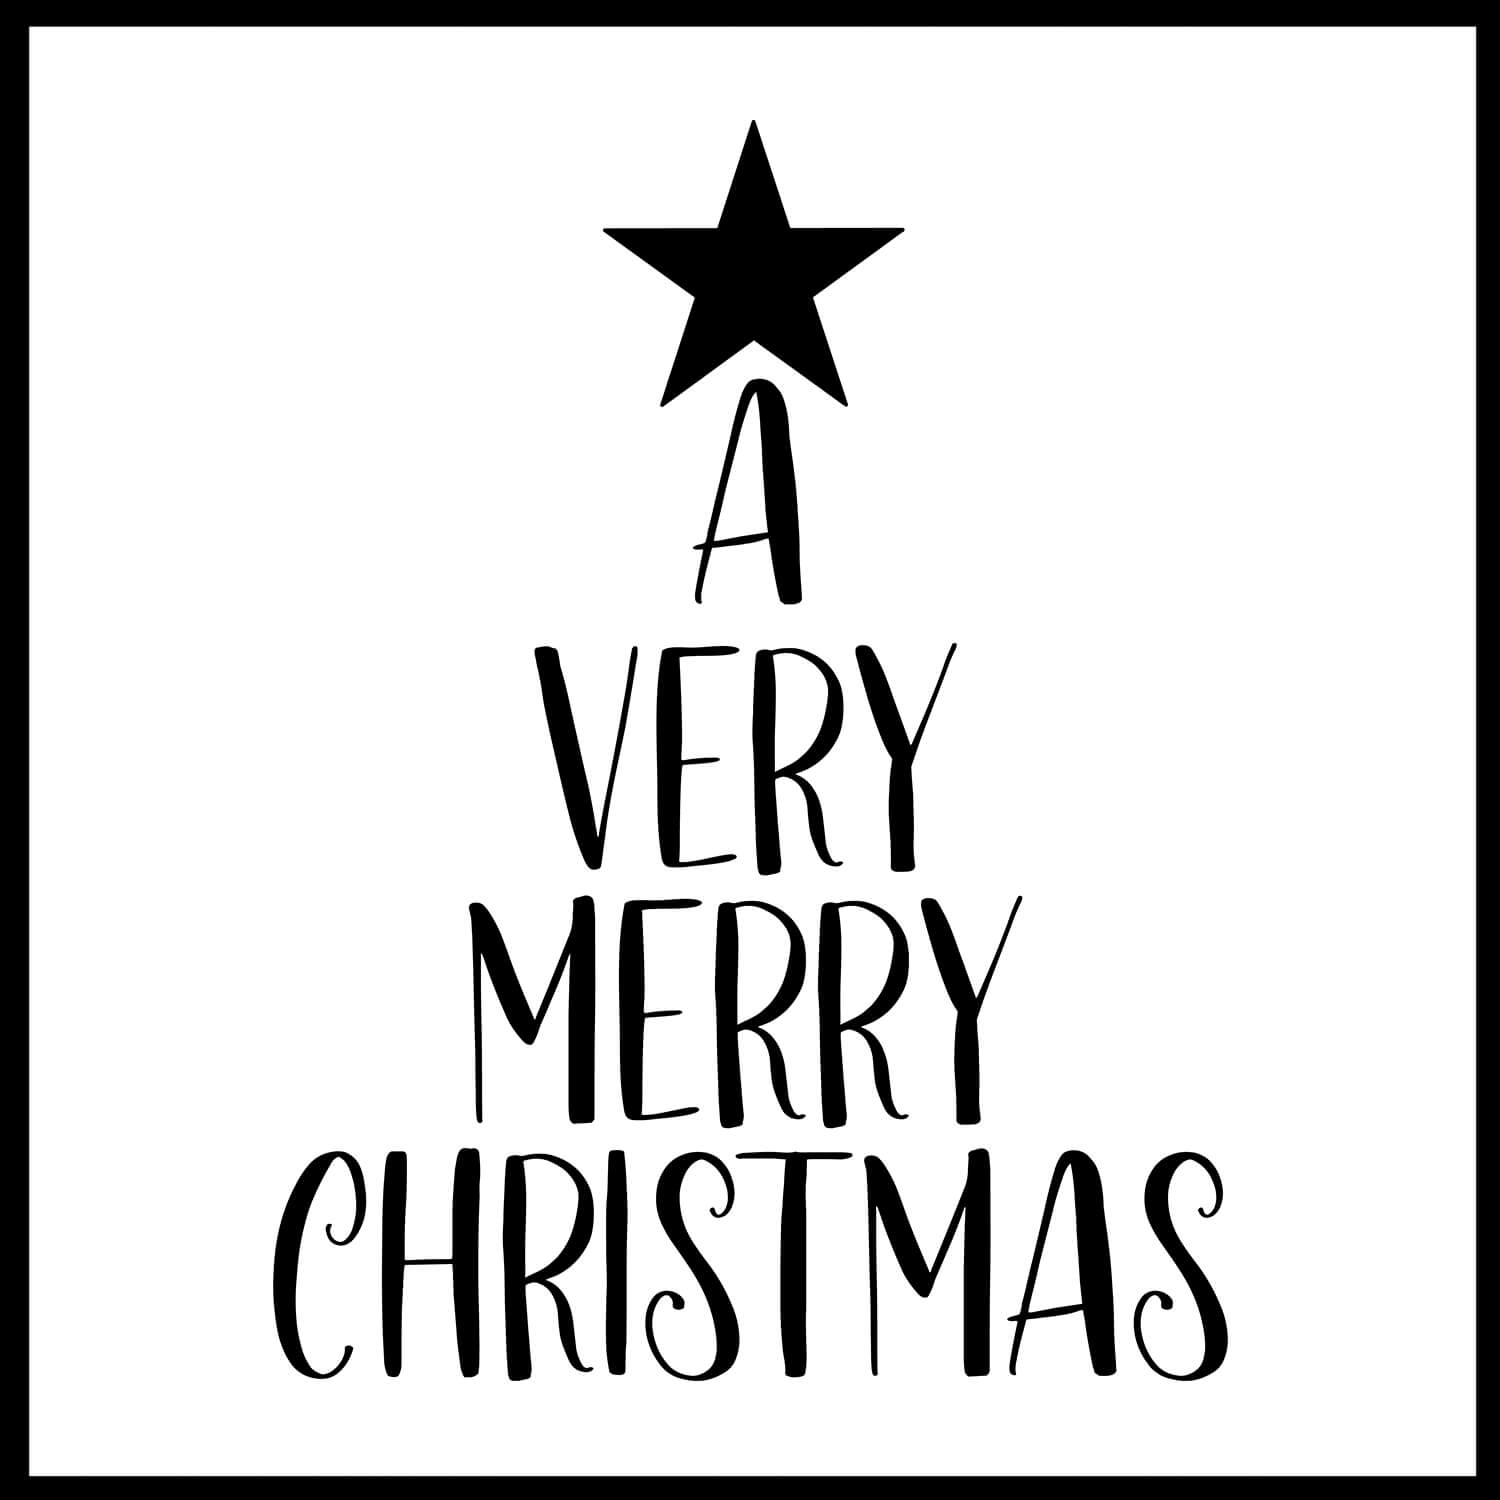 A Very Merry Christmas FREE SVG Files 1489 cover image.